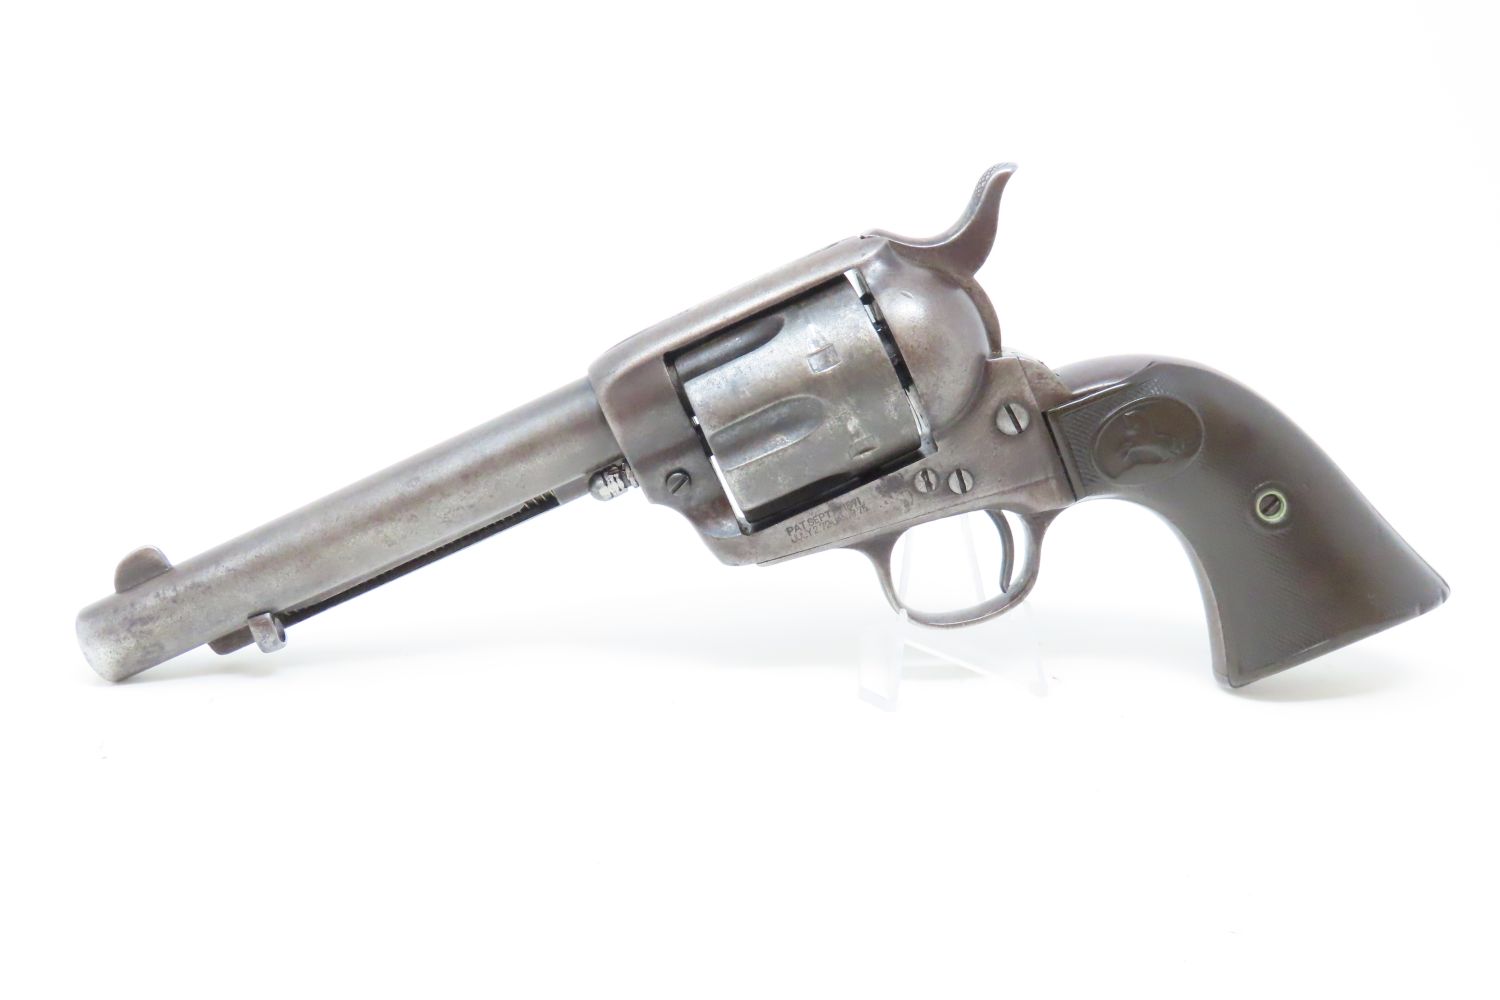 COLT Single Action Army “PEACEMAKER” Chambered in .41 Long Colt 